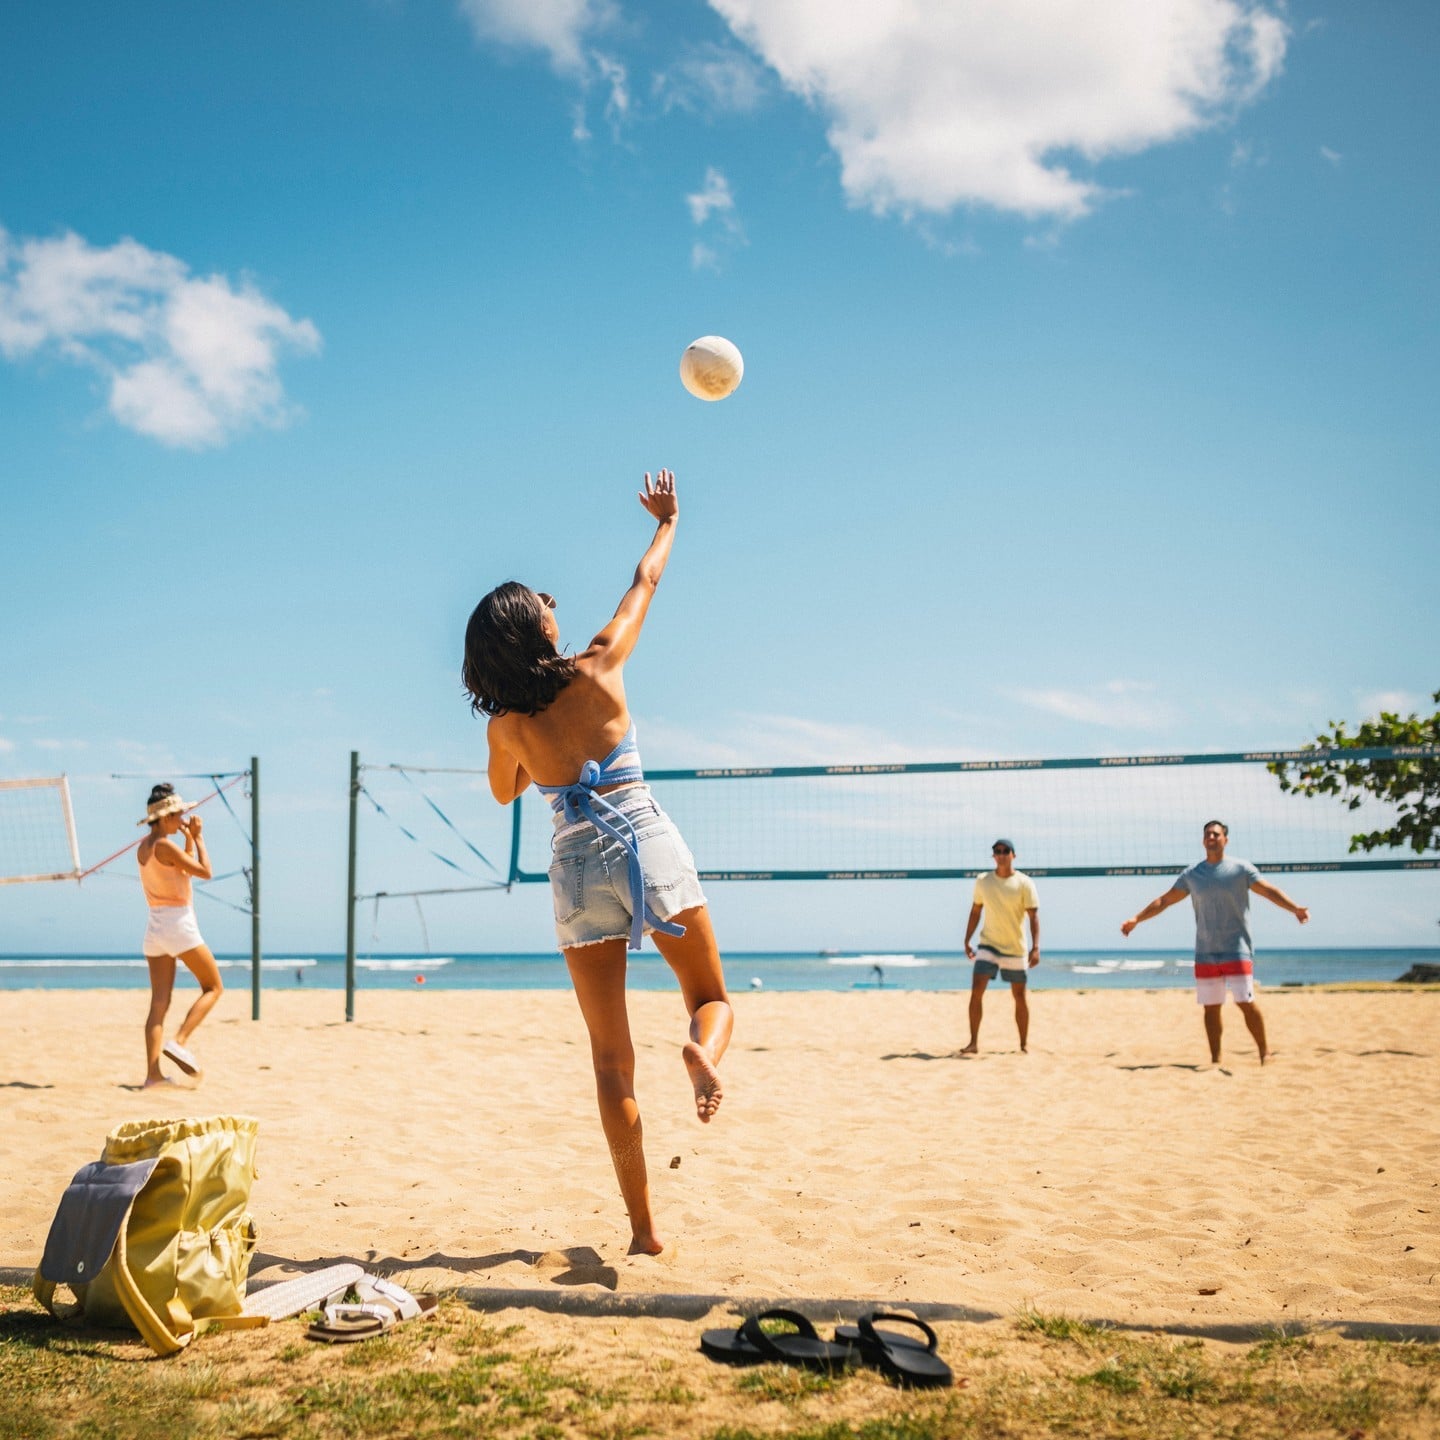 There are so many ways to enjoy the spacious parks at Ward Village. Whether it’s beach volleyball at Ala Moana Beach Park or yoga at Victoria Ward Park, from sunup to sundown, discover endless outdoor activities throughout the neighborhood.